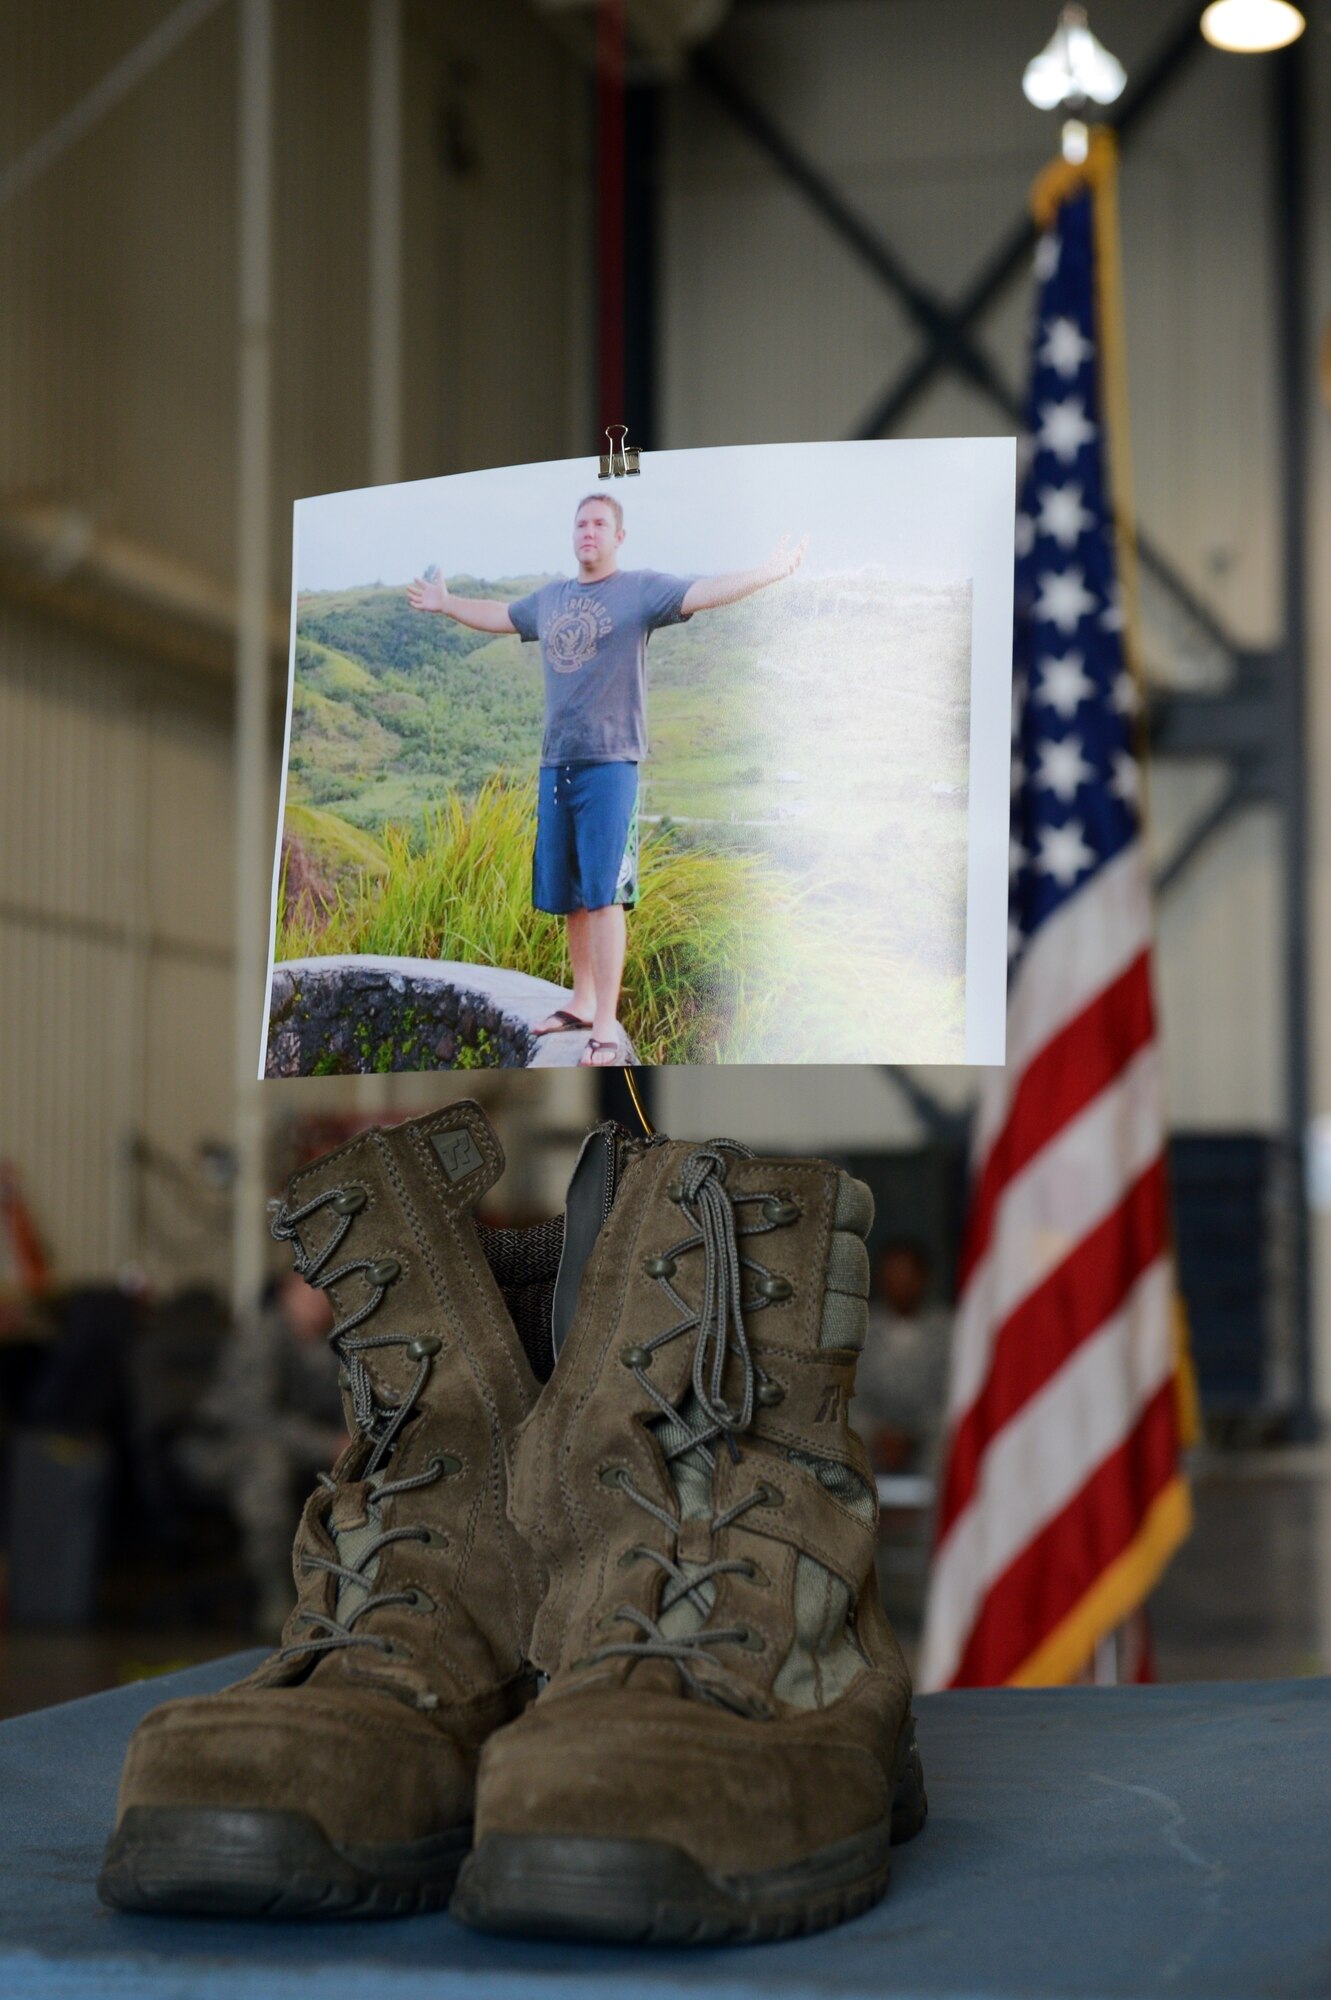 Members of the Nebraska Air National Guard’s 155th Air Refueling Wing participate in a memorial service for Senior Airman Dale Butler at the Nebraska National Guard air base in Lincoln, Neb., June 8, 2013. Butler was killed in a civilian aircraft accident near Norfolk, Neb., April 27, 2013. (U.S. Air National Guard photo by Staff Sgt. James Lieth/Released)